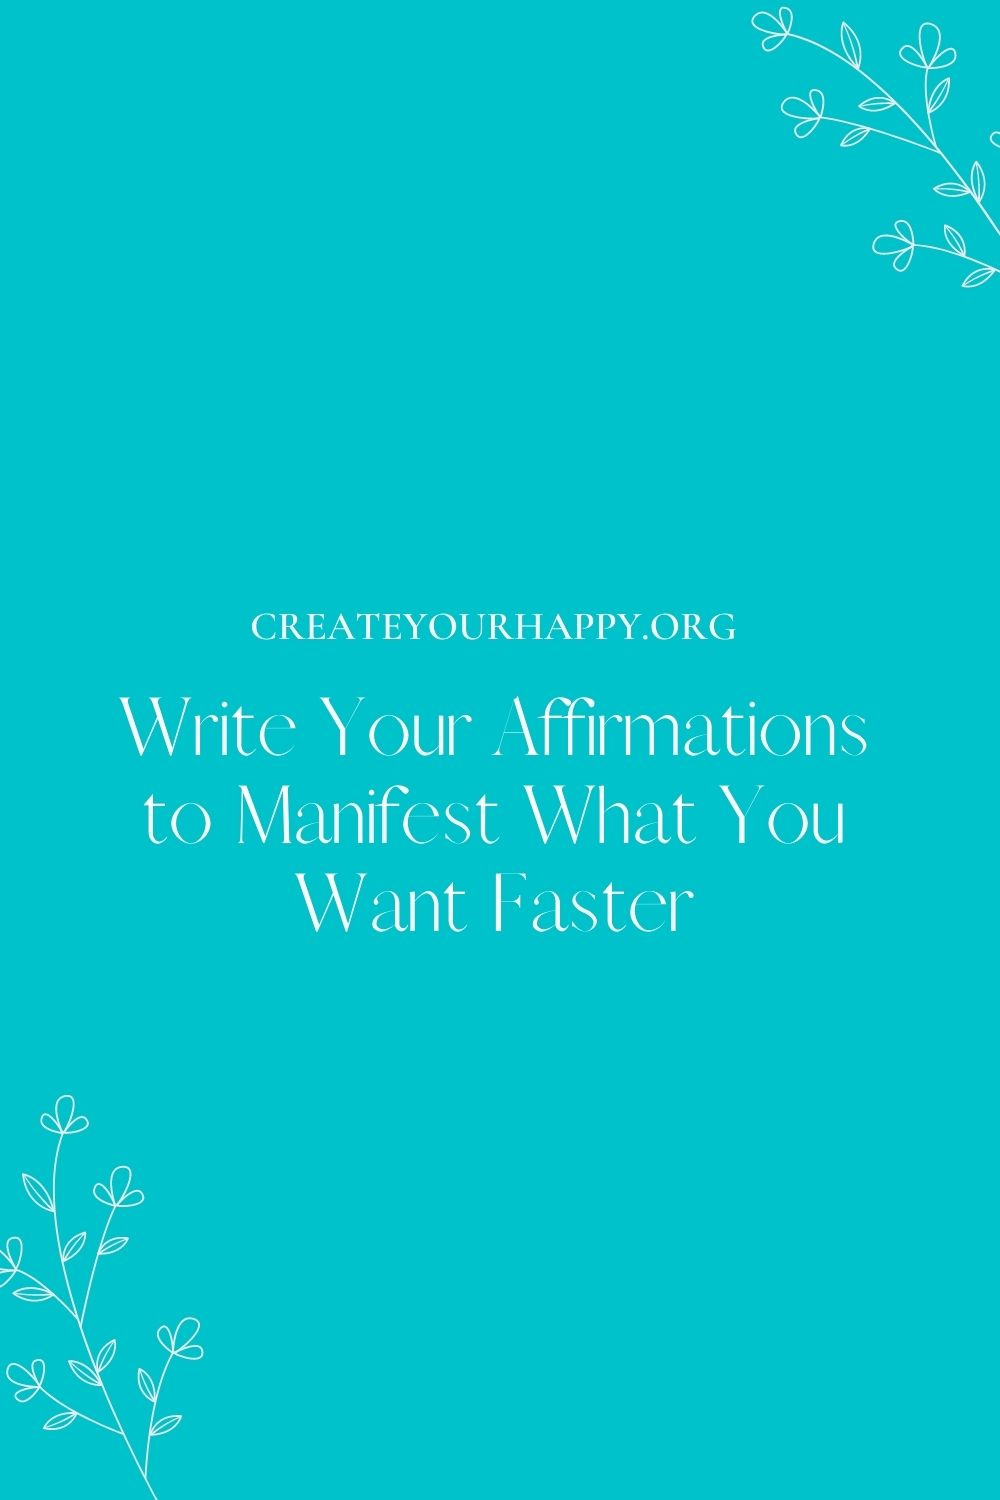 Write Your Affirmations to Manifest What You Want Faster